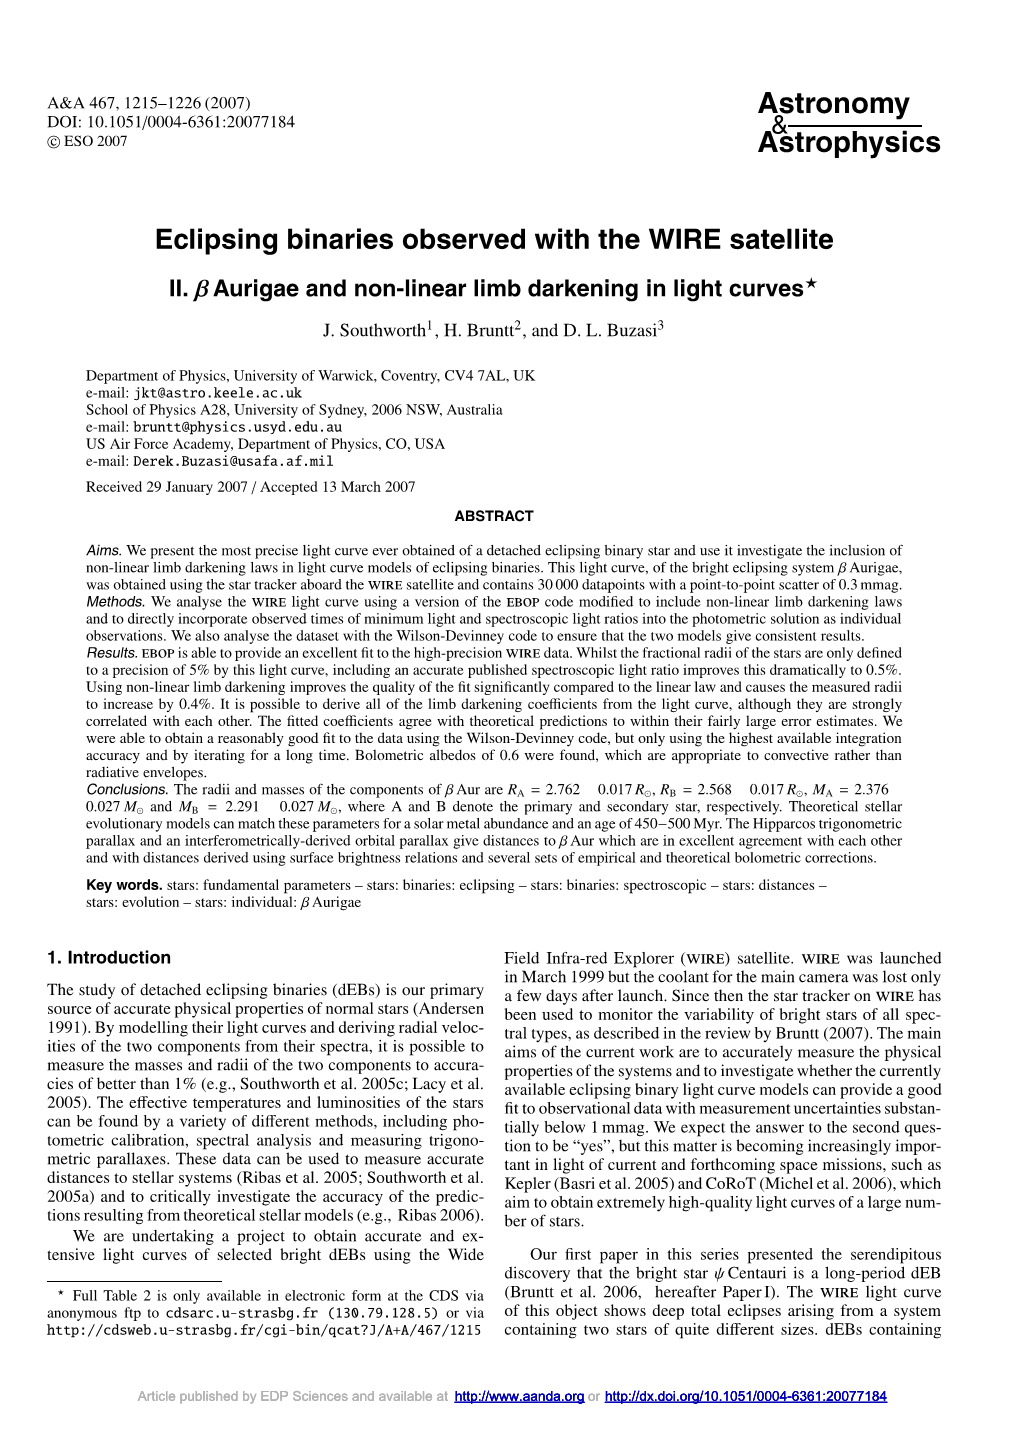 Eclipsing Binaries Observed with the WIRE Satellite II